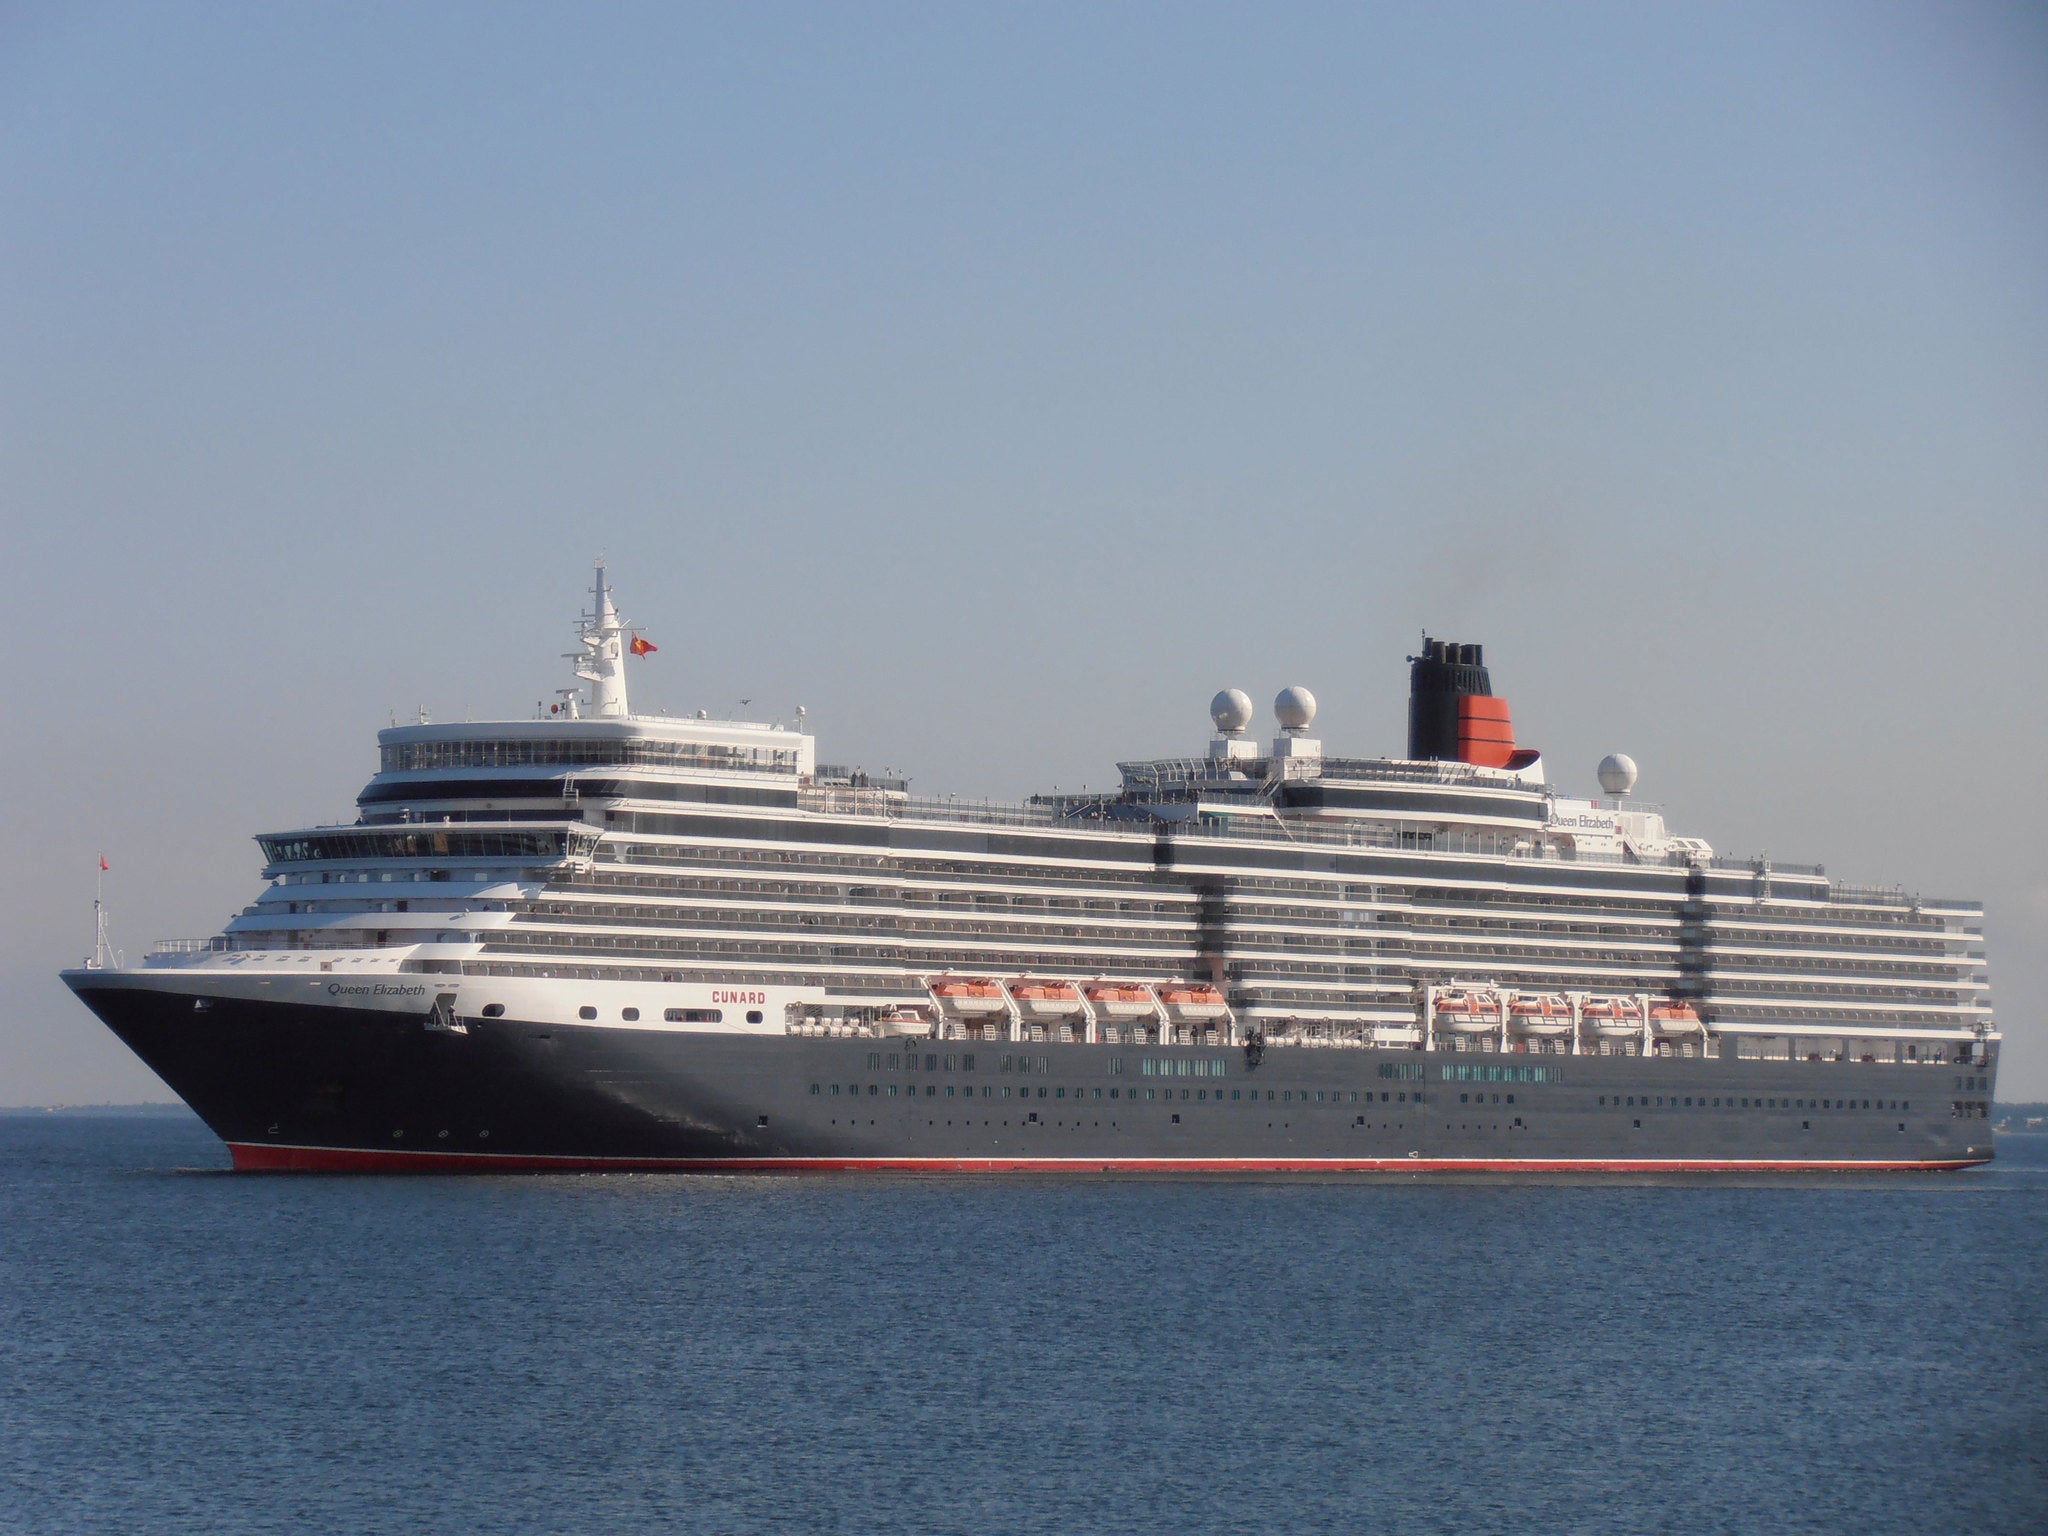 The Queen Elizabeth cruise ship operated by Cunard